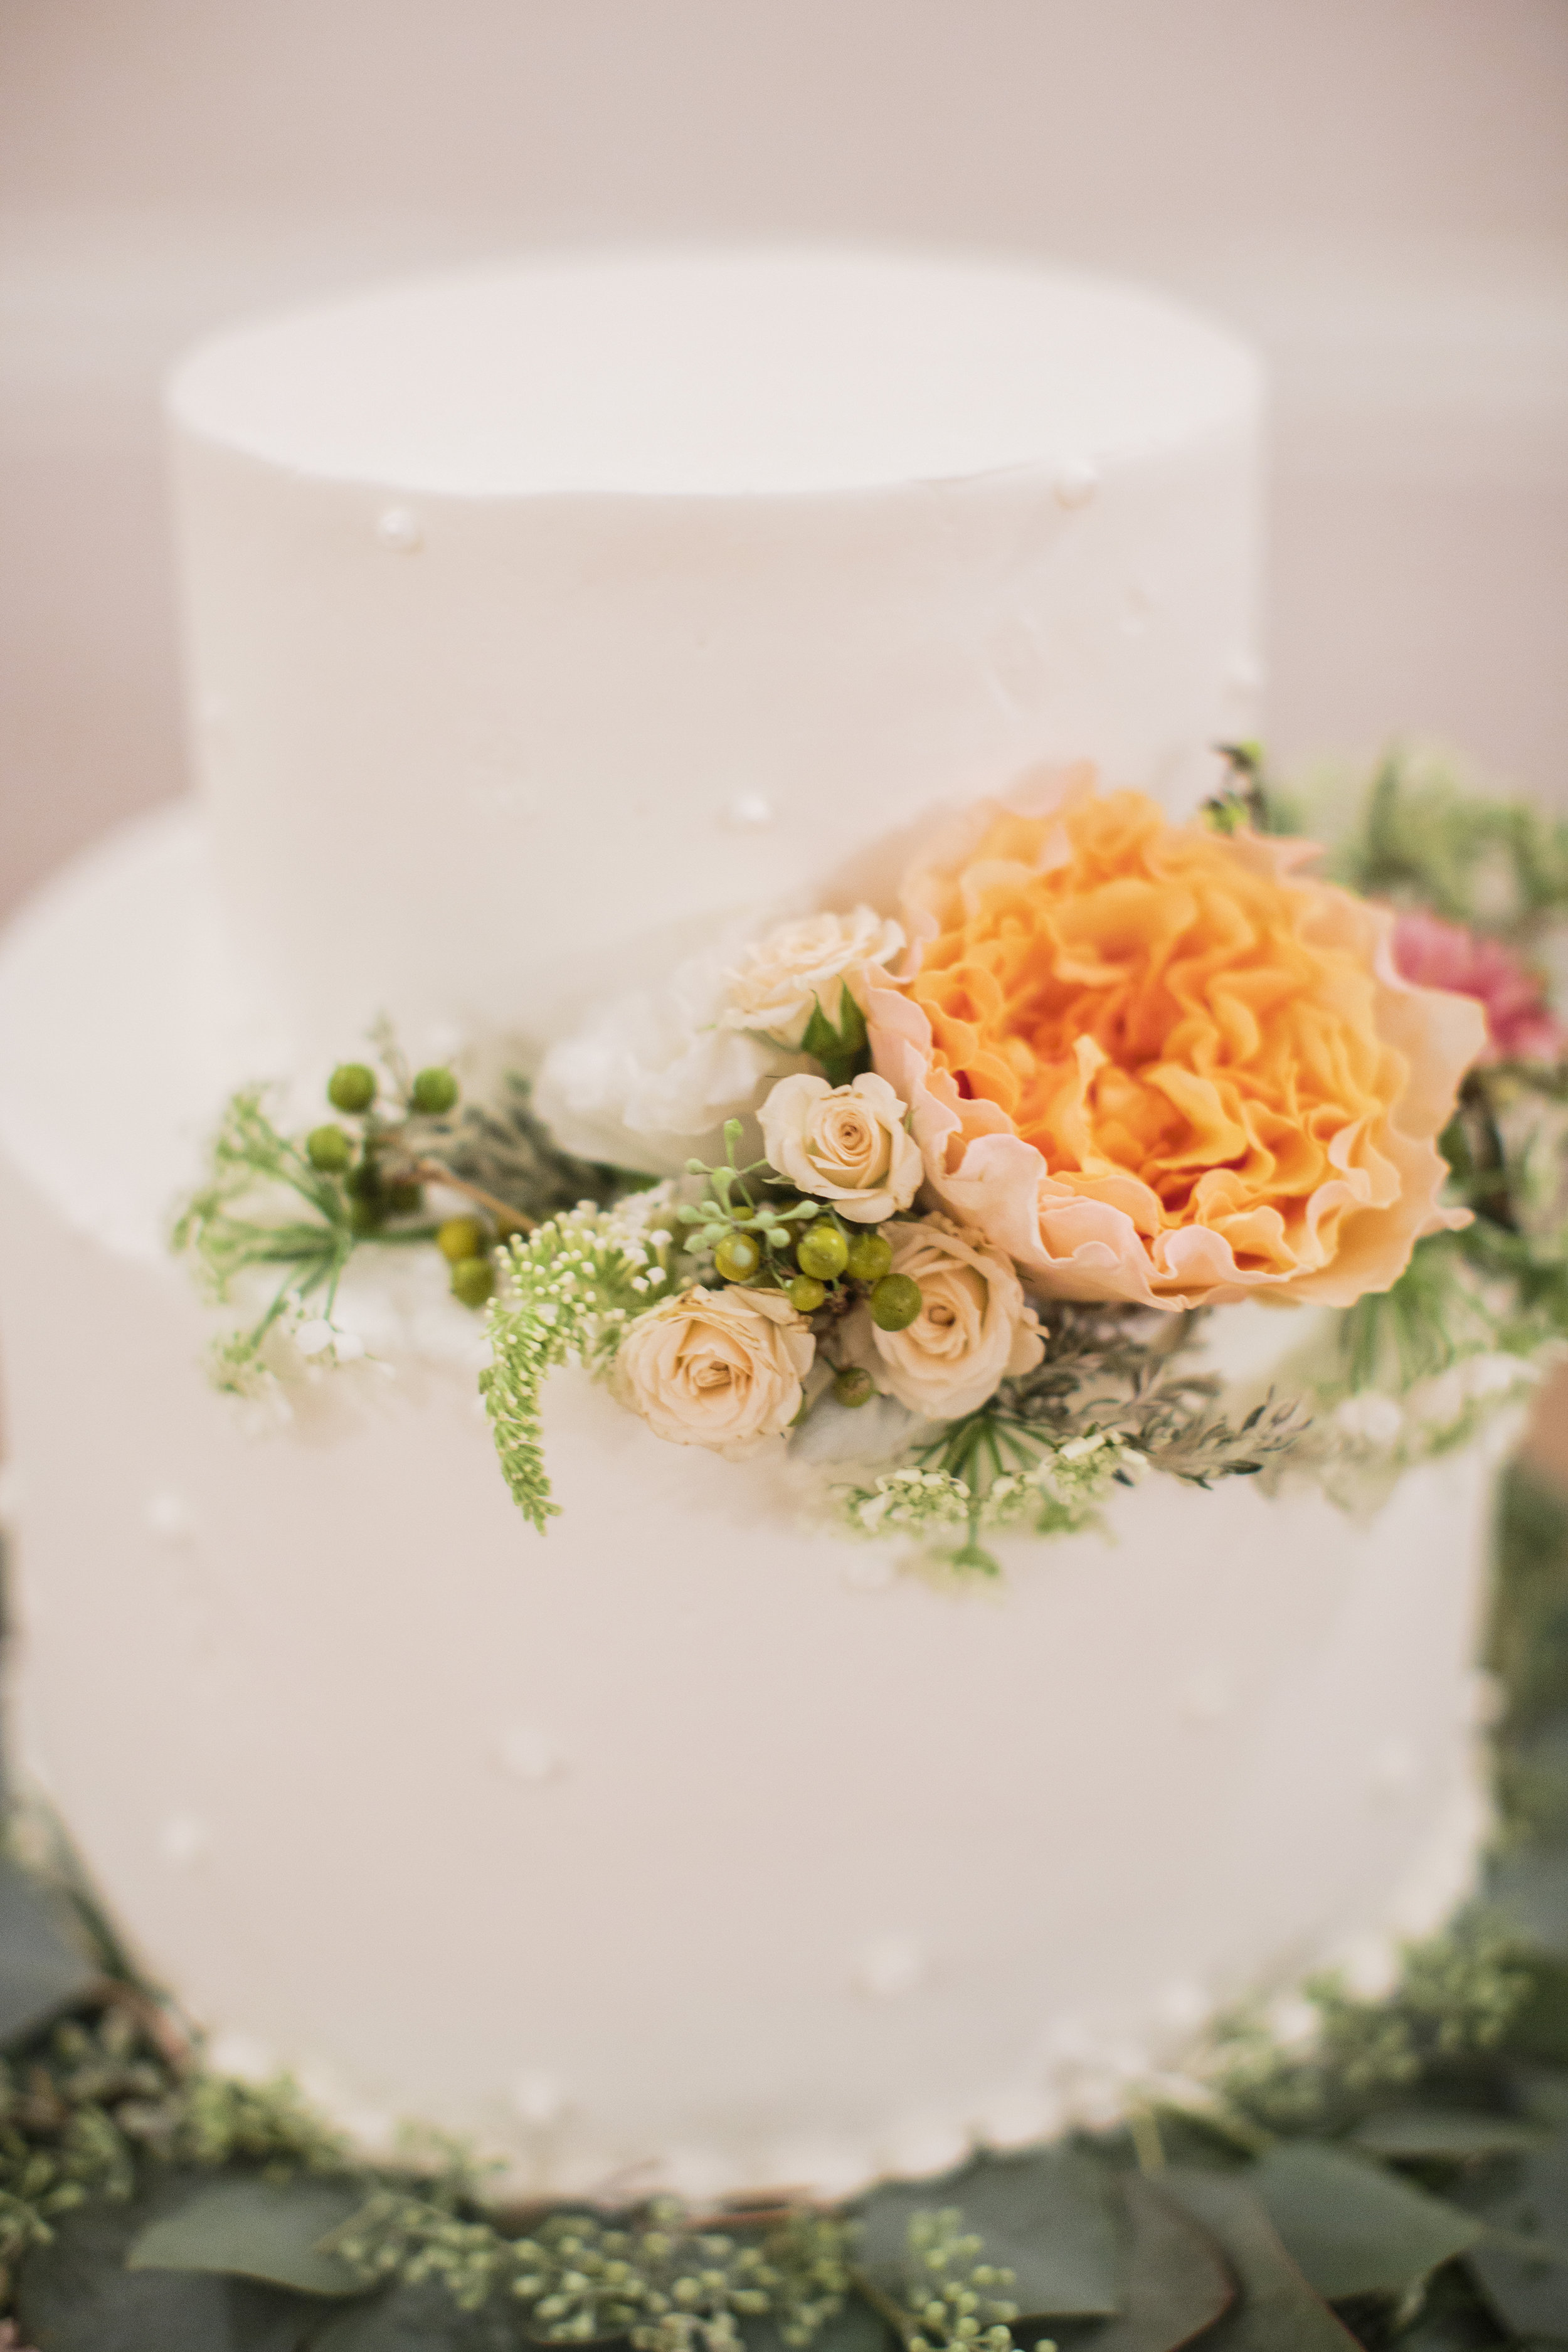 Two Tier Wedding Cake with Florals | Simply Charming Socials | Atlanta Wedding Planner